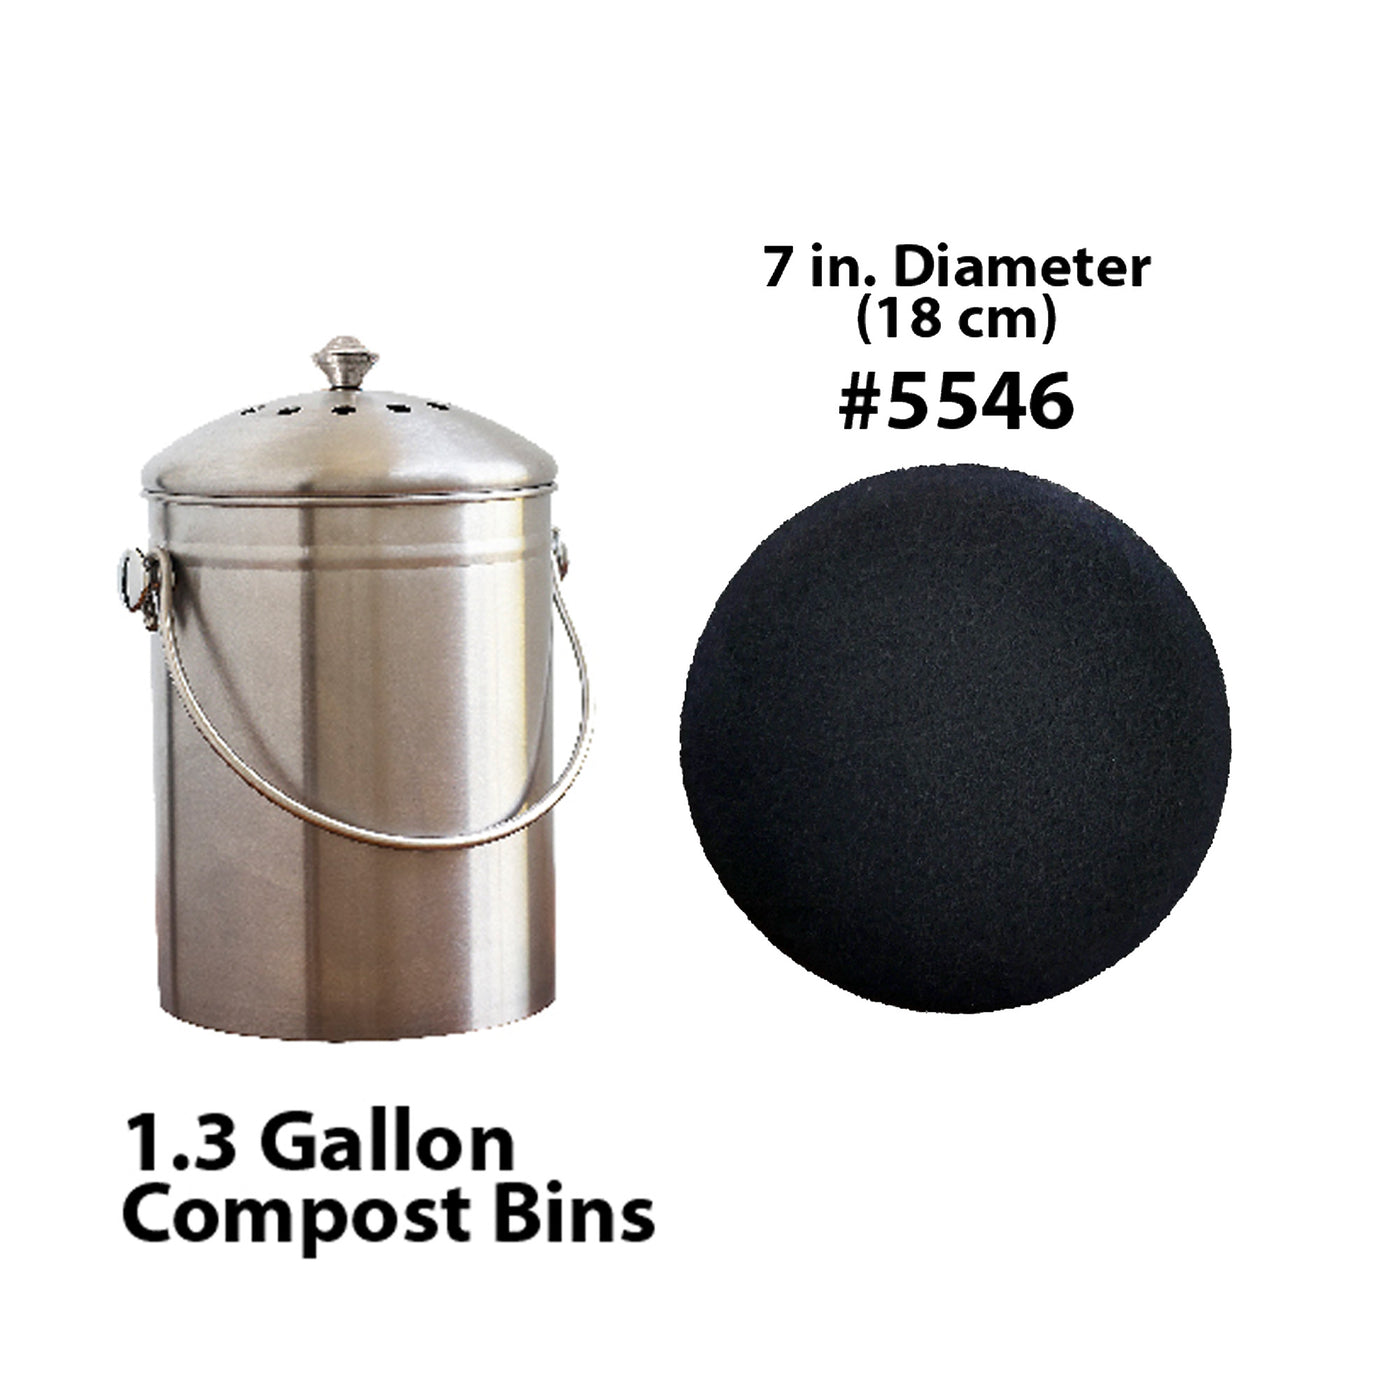 Extra Thick Filters for Kitchen Compost Bins - Fits All Compost